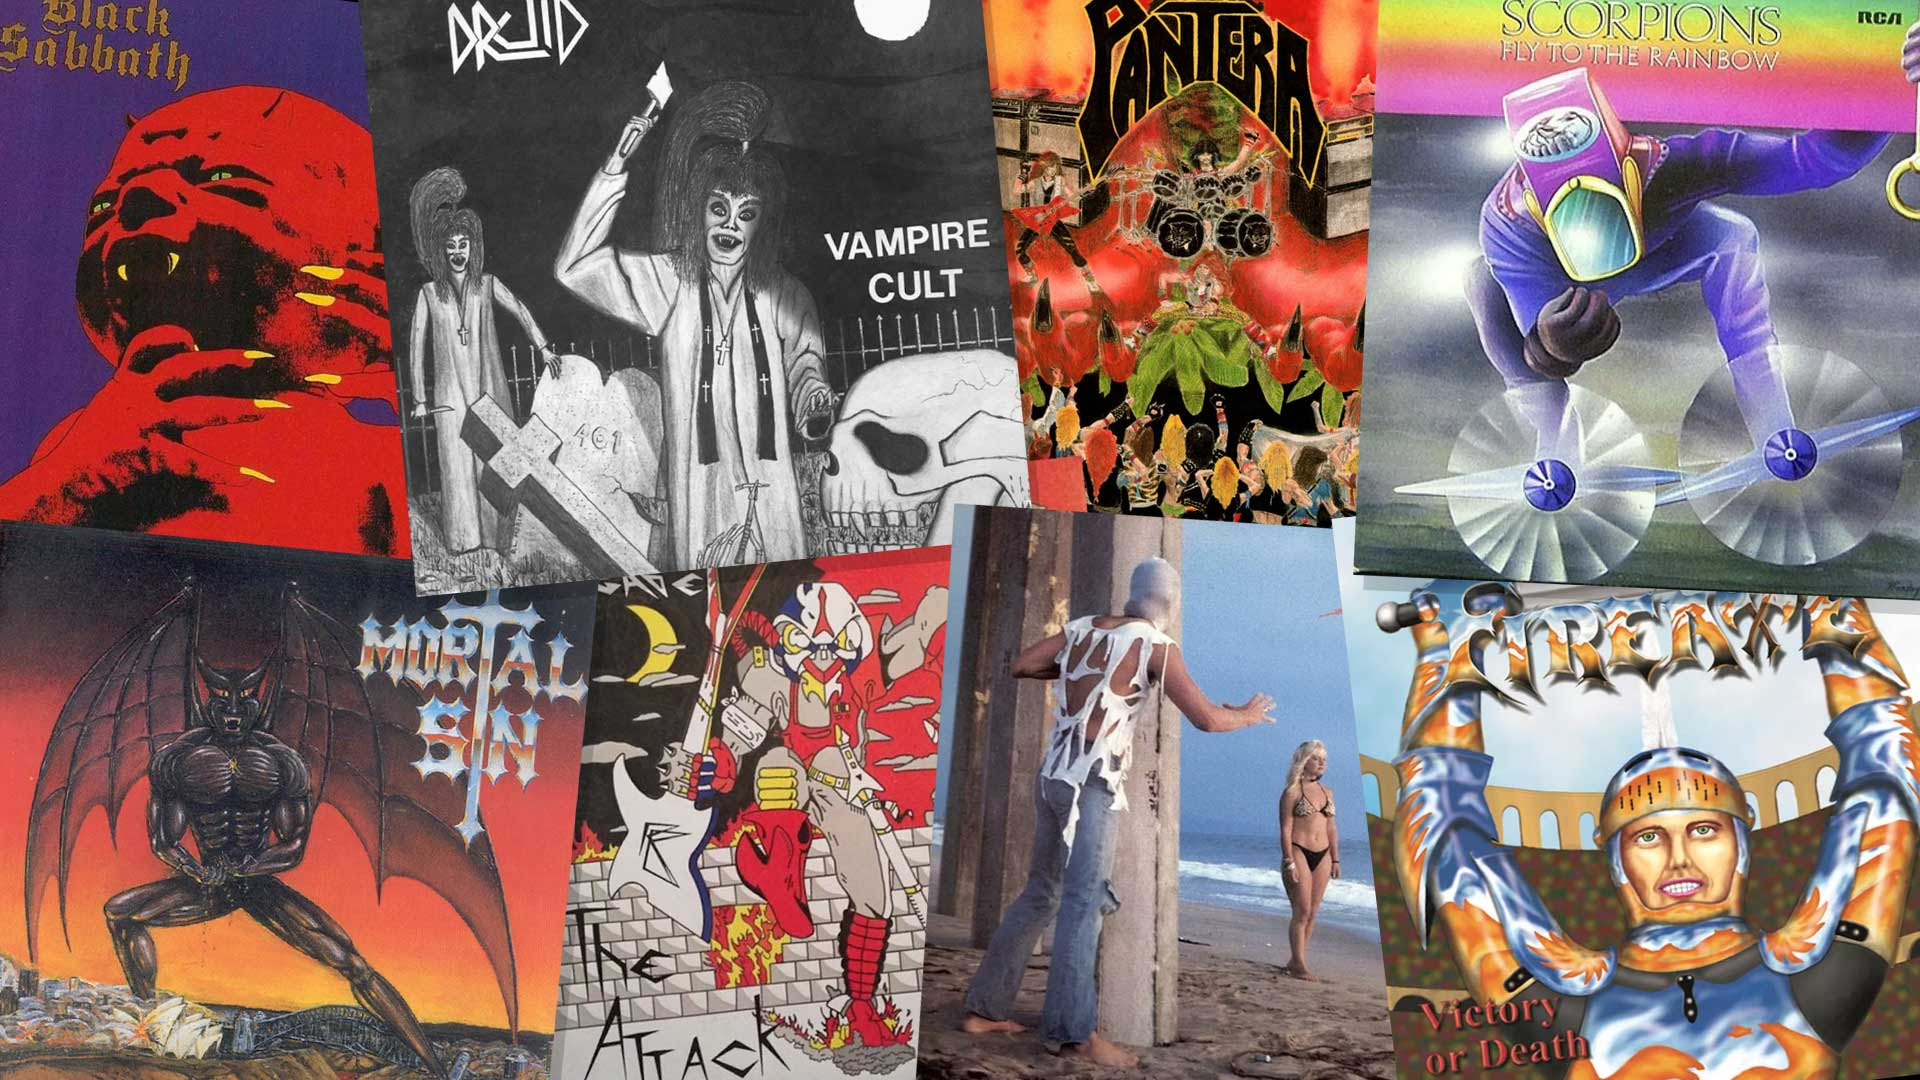 The 50 most hilariously ugly rock and metal album covers ever